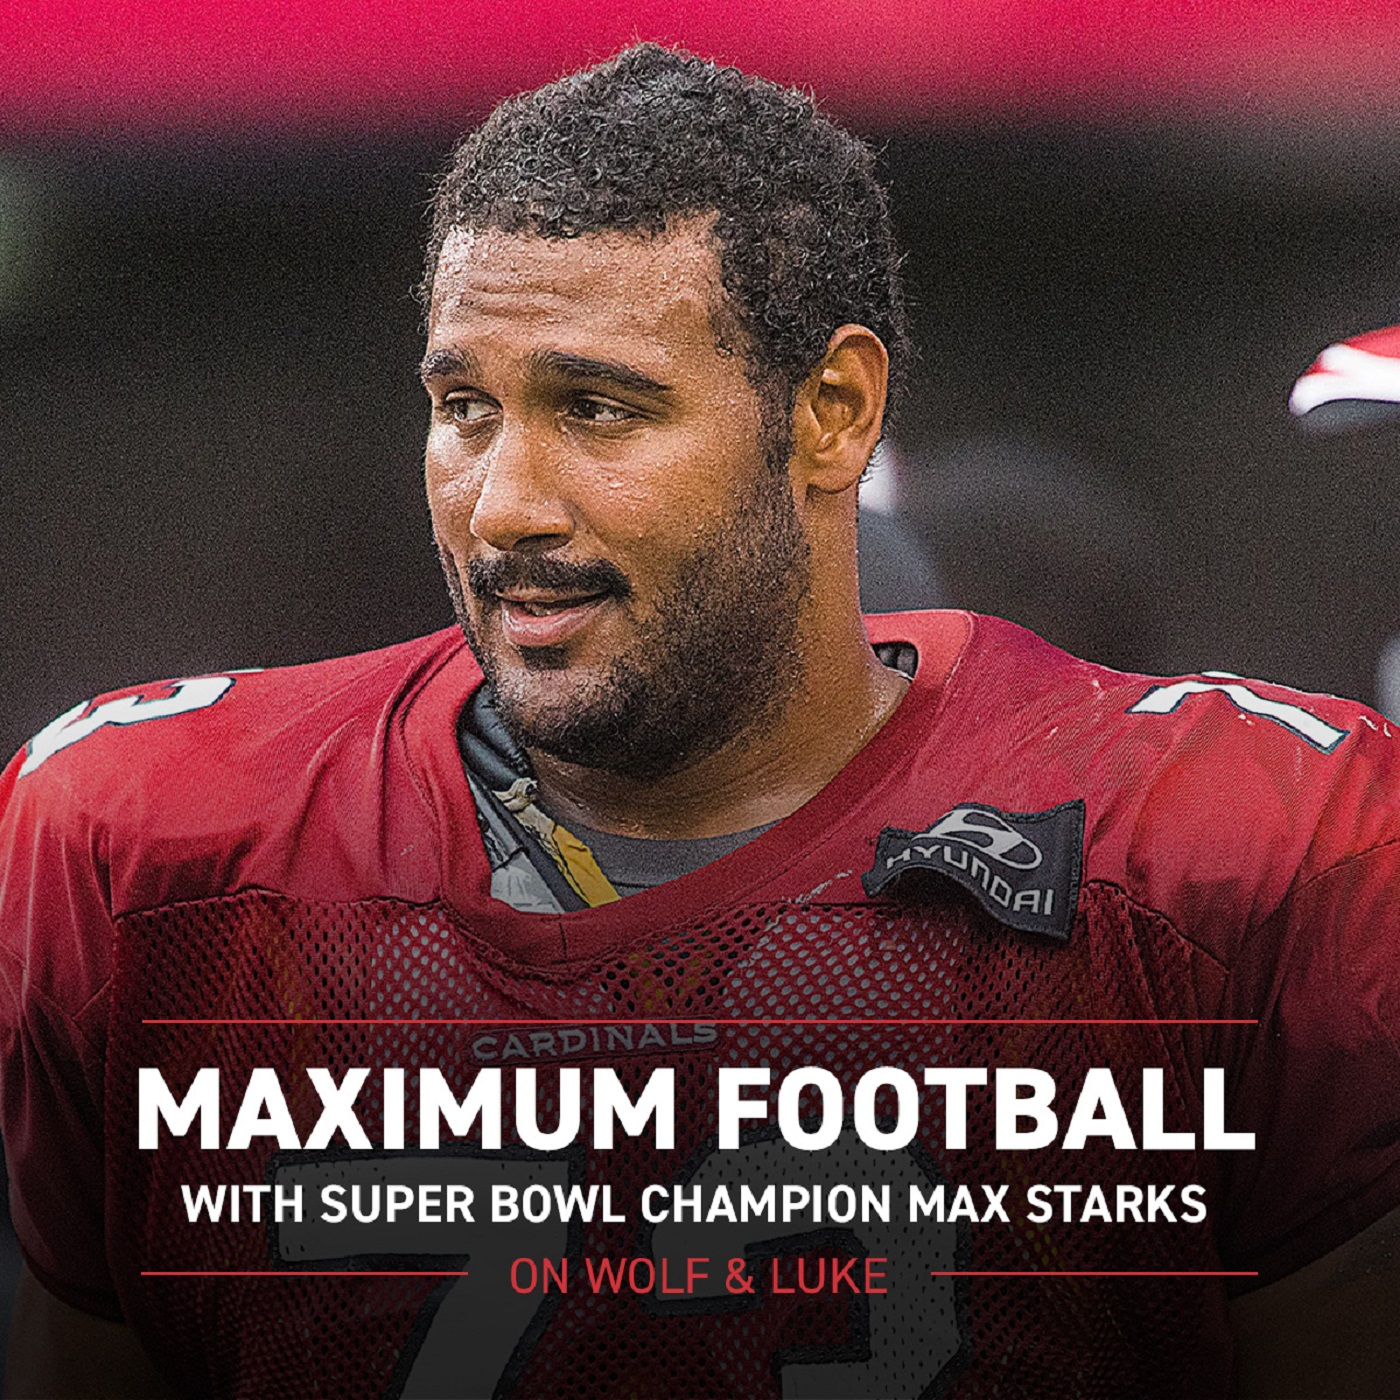 Maximum Football with 2-time Super Bowl Champion Max Starks